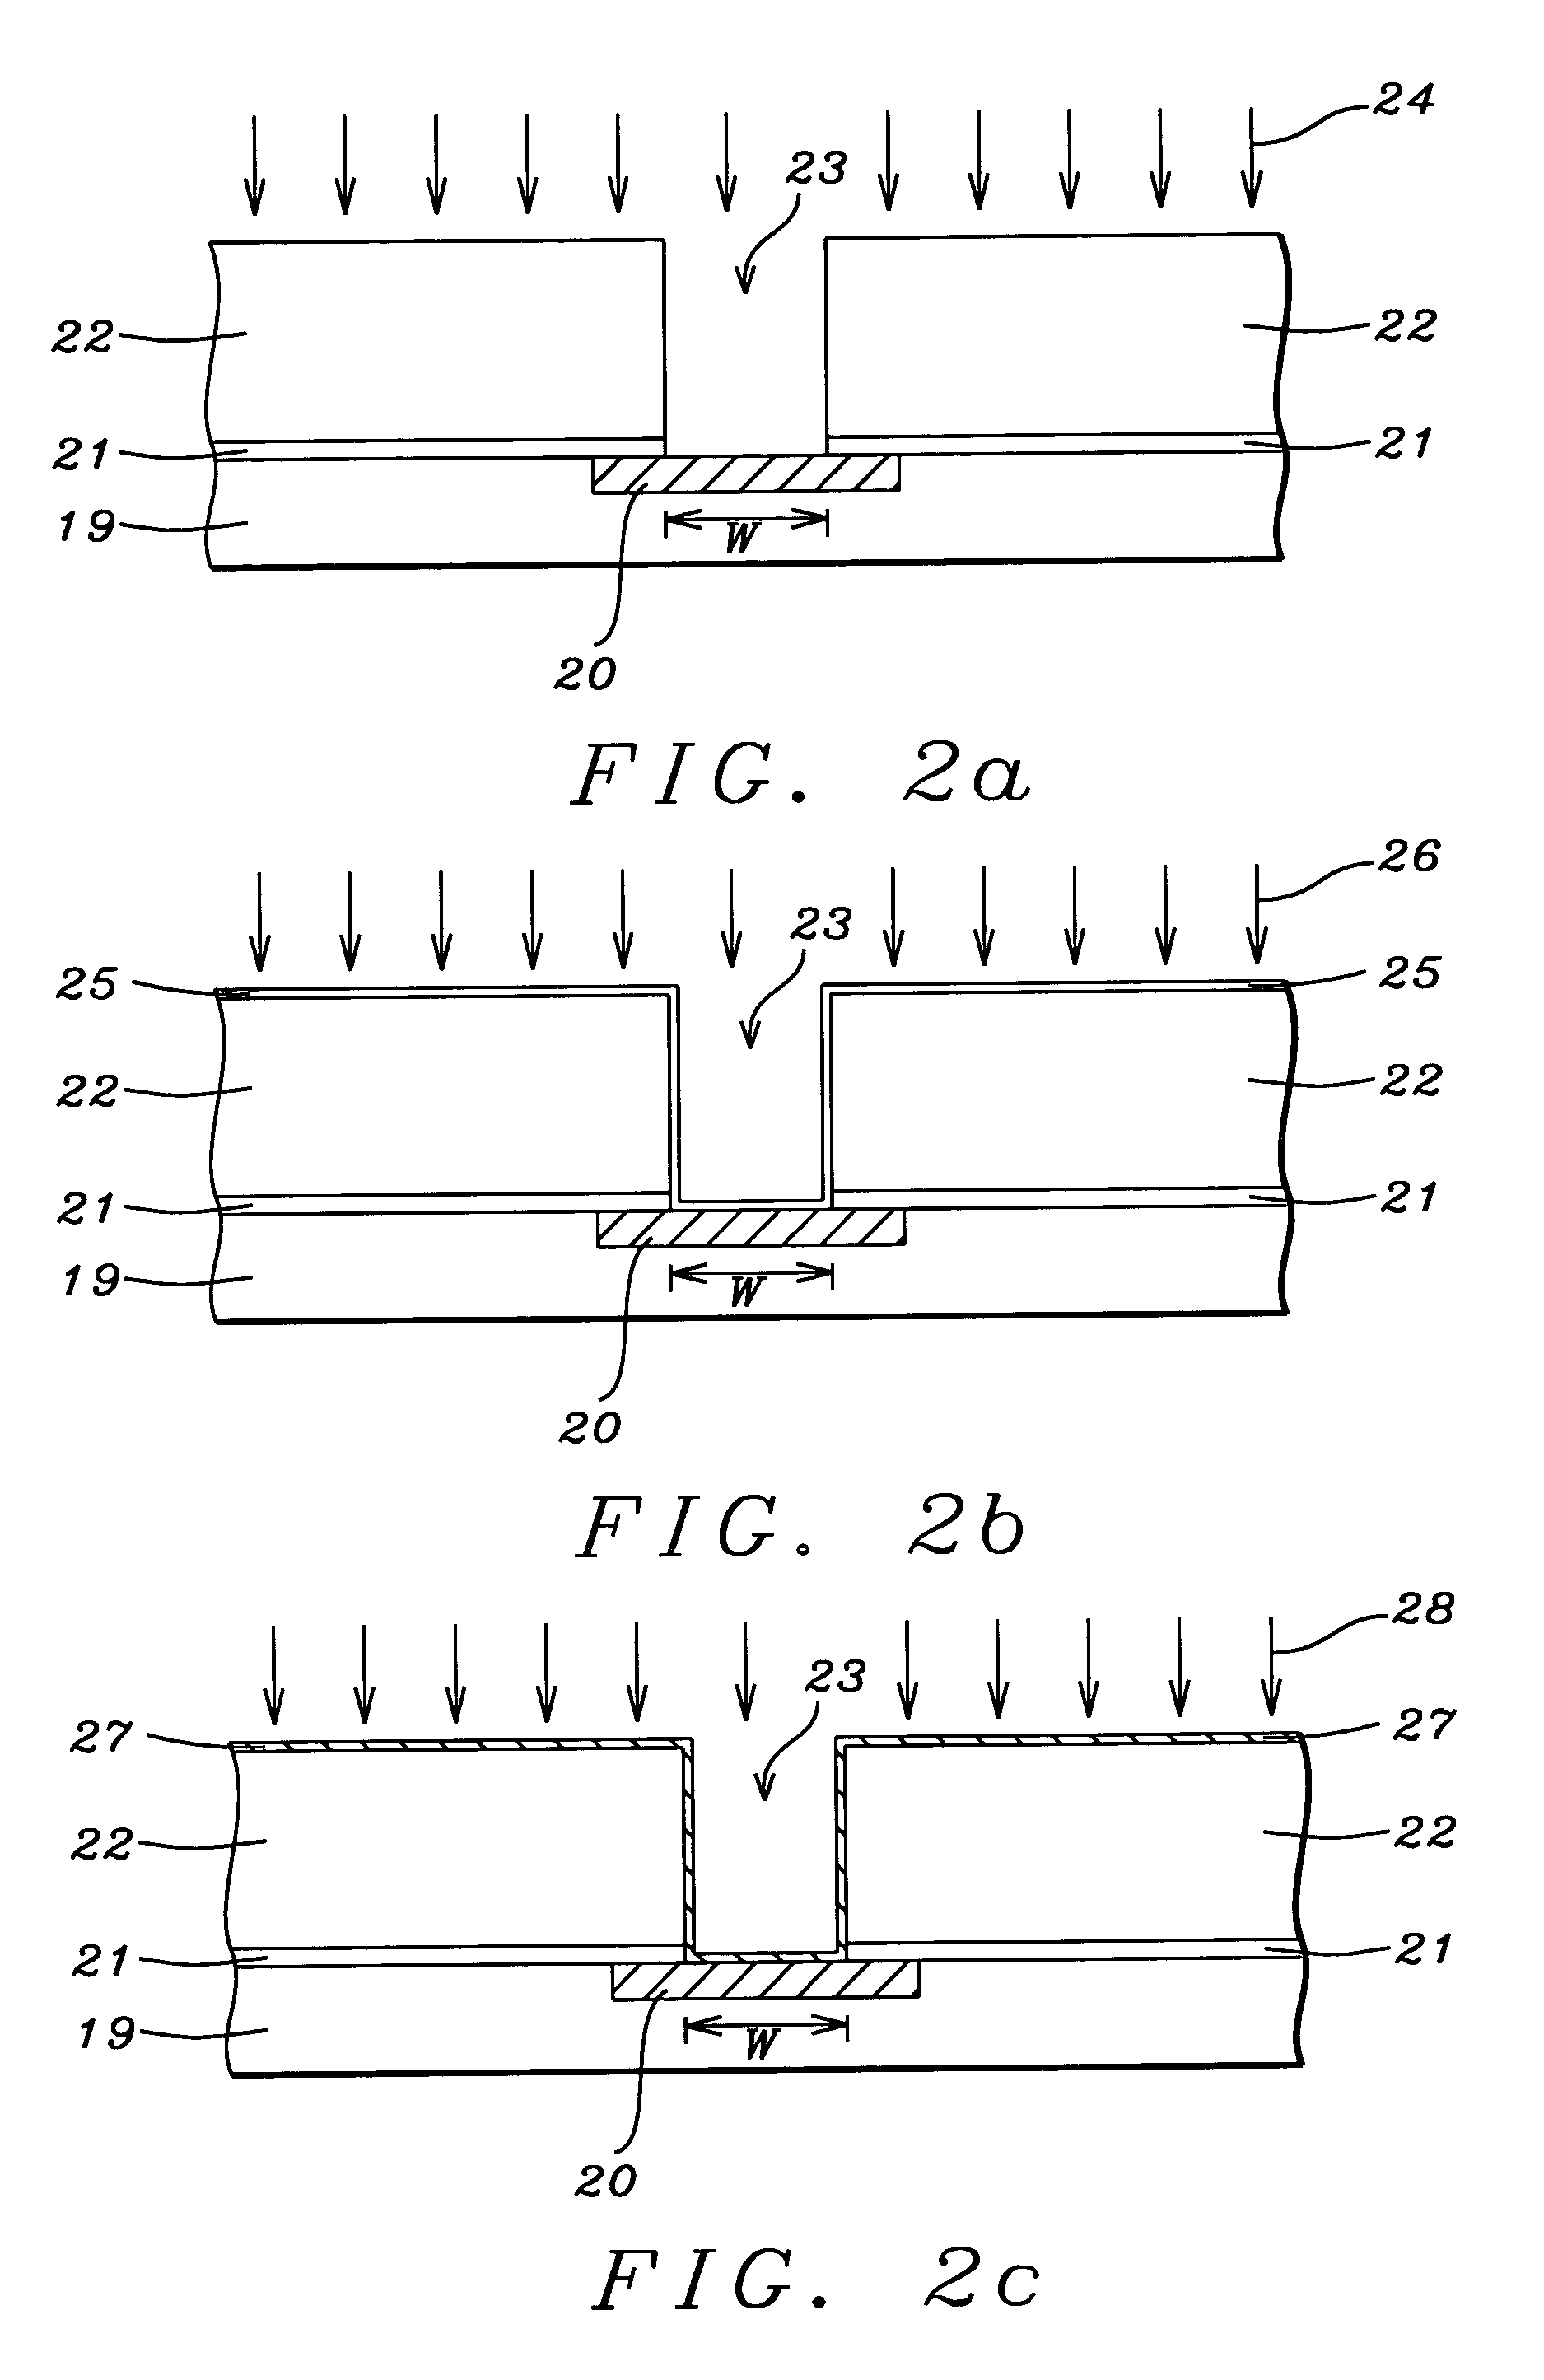 Method of multi-element compound deposition by atomic layer deposition for IC barrier layer applications